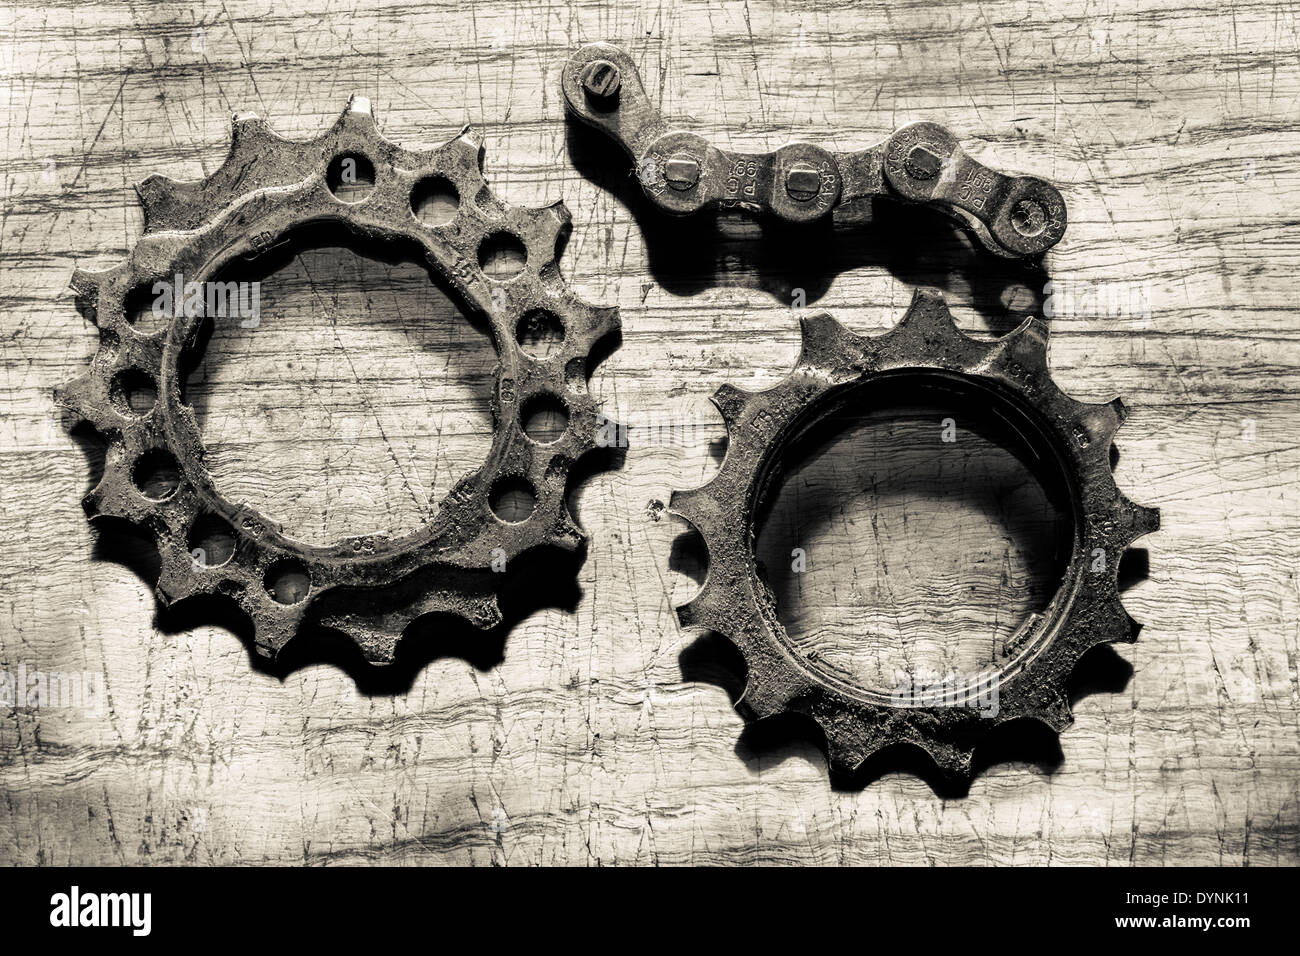 Bicycle drive cogs and chain. Stock Photo